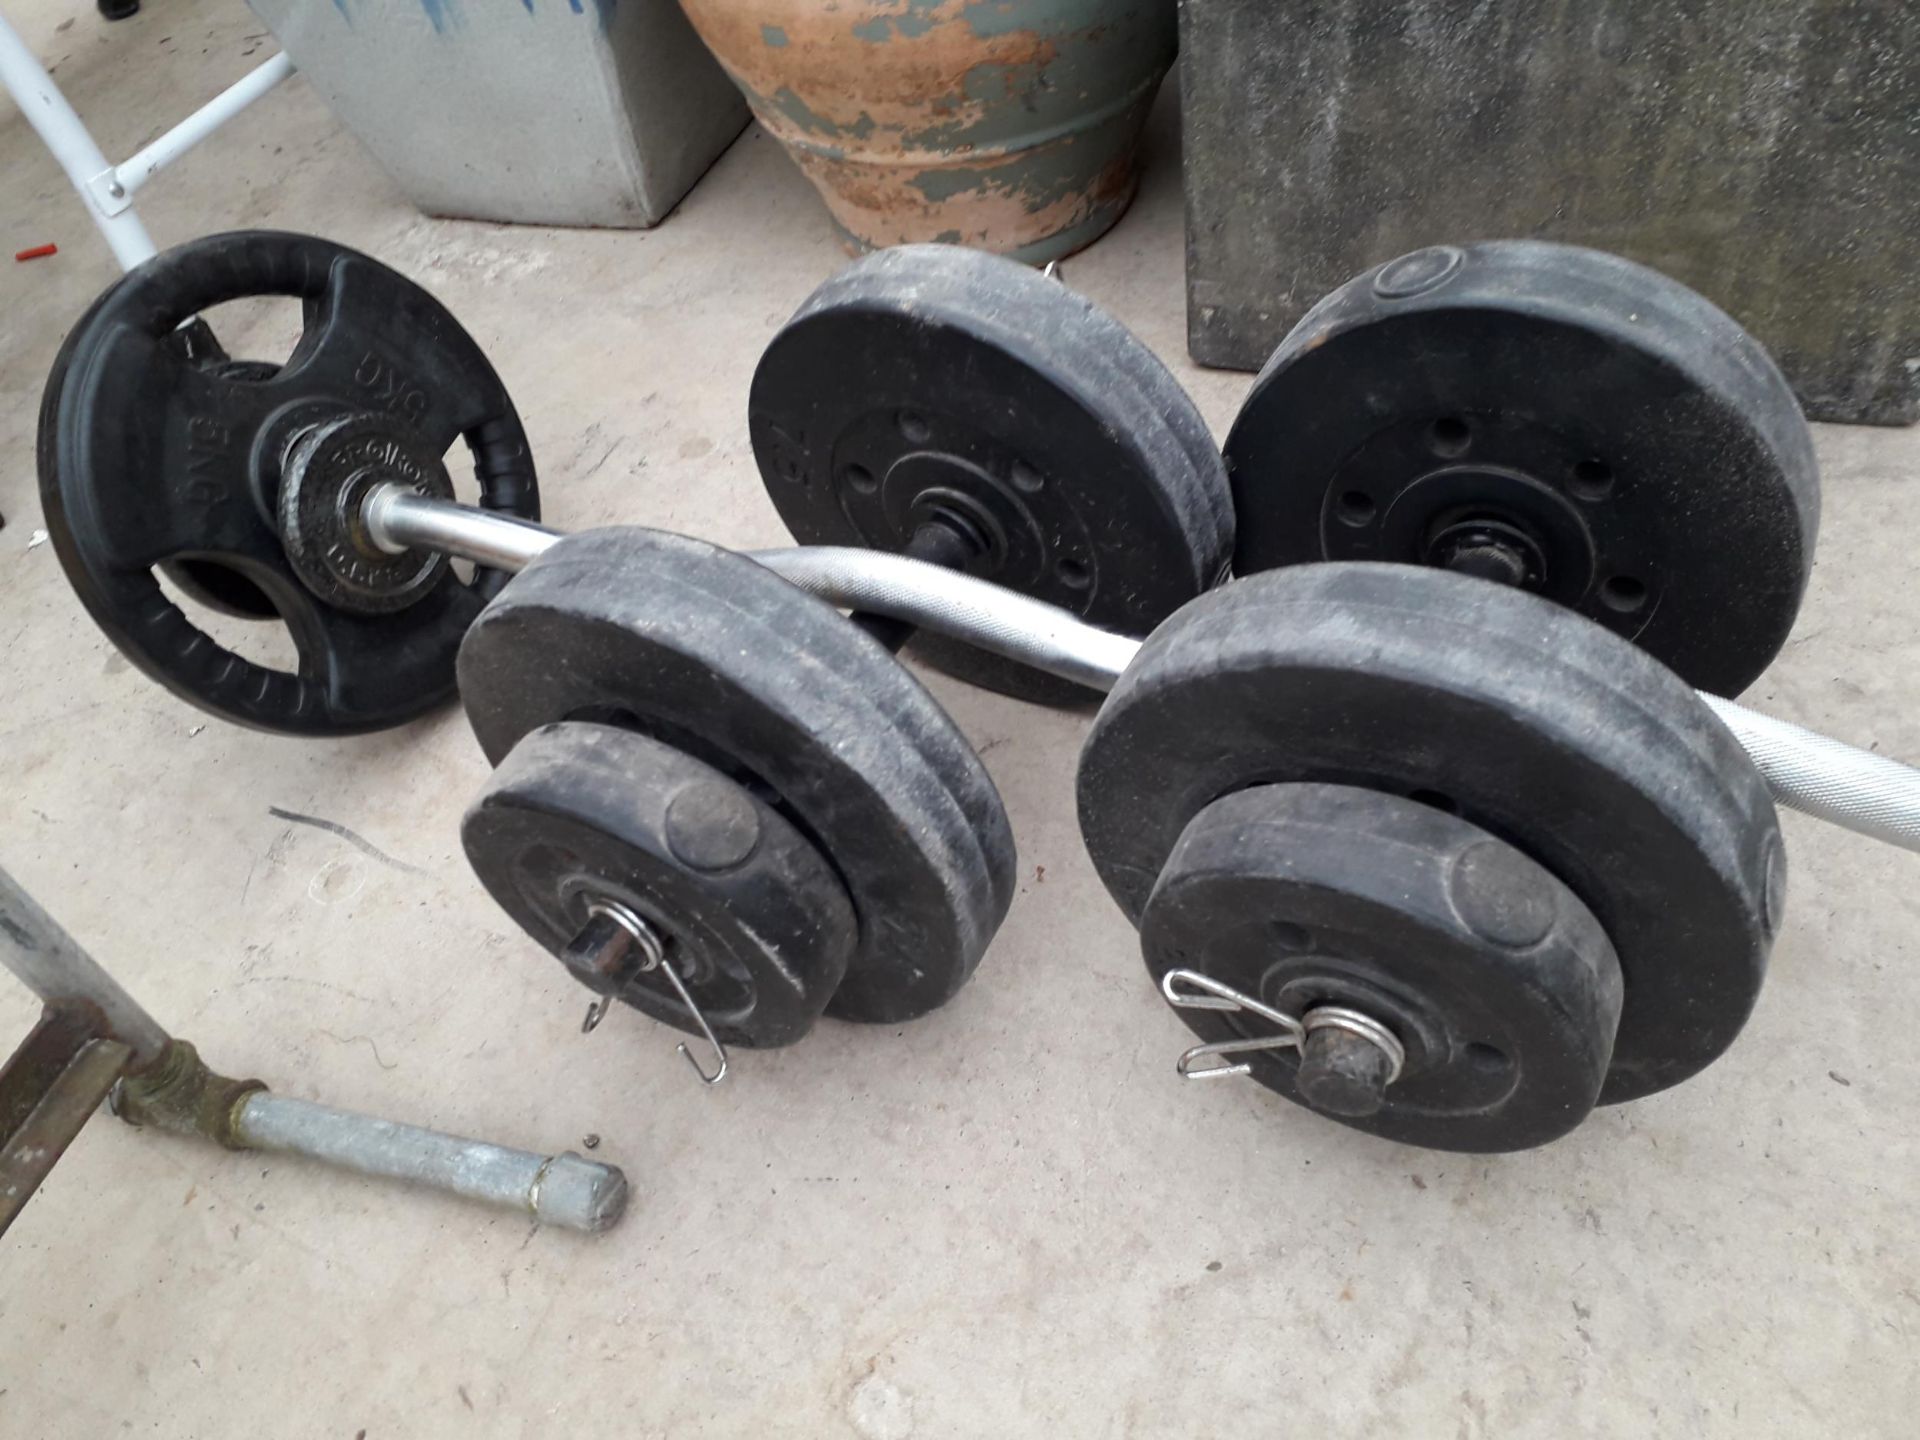 A PAIR OF DUMB BELL WEIGHTS AND A CHROME WEIGHTLIFTING BAR - Image 2 of 2